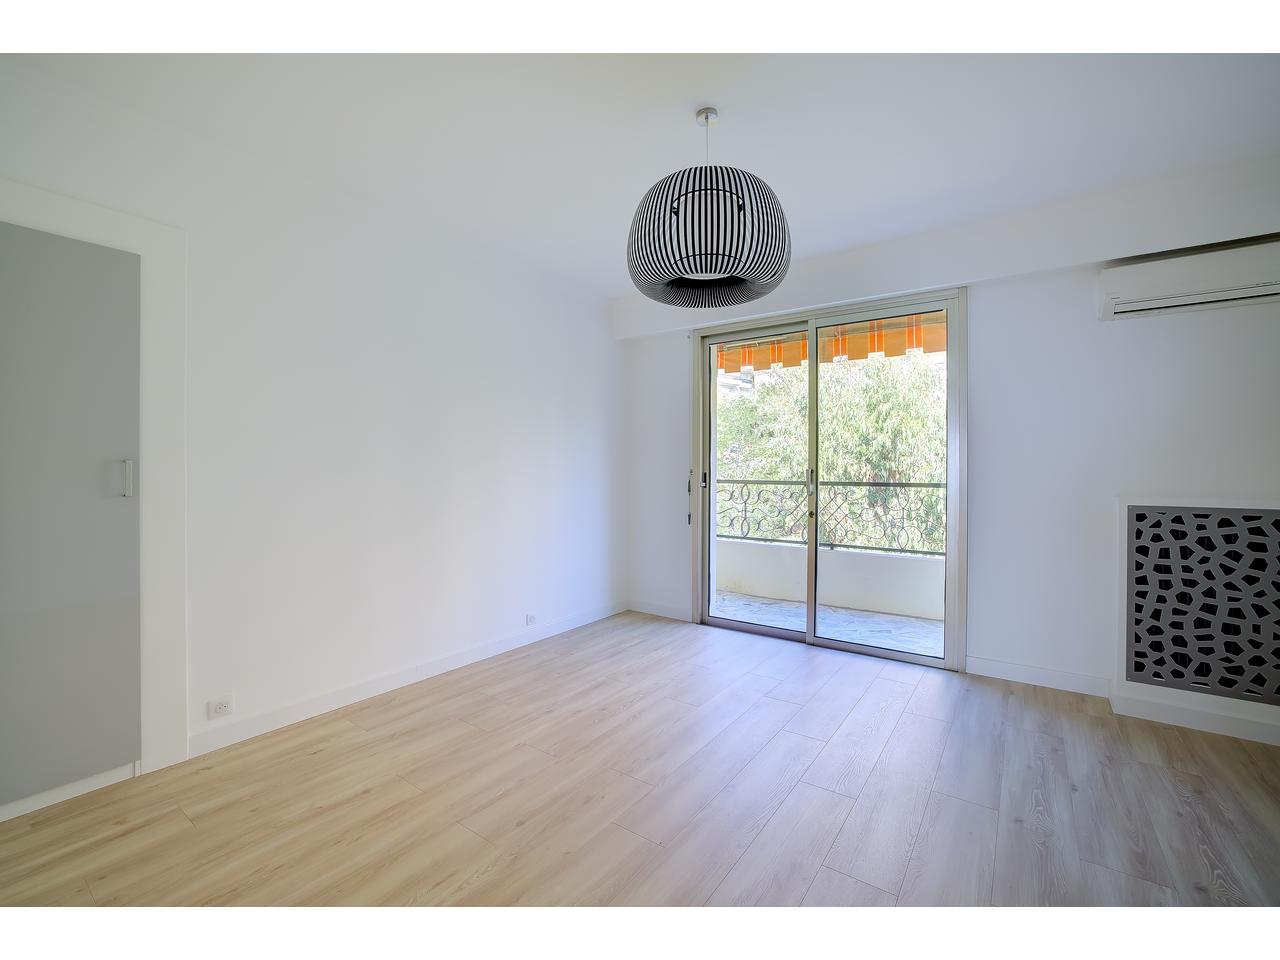 Nice Riviera - Real estate agency Nice Côte d'Azur | Appartement  3 Rooms 113m2  for sale  1 195 000 €